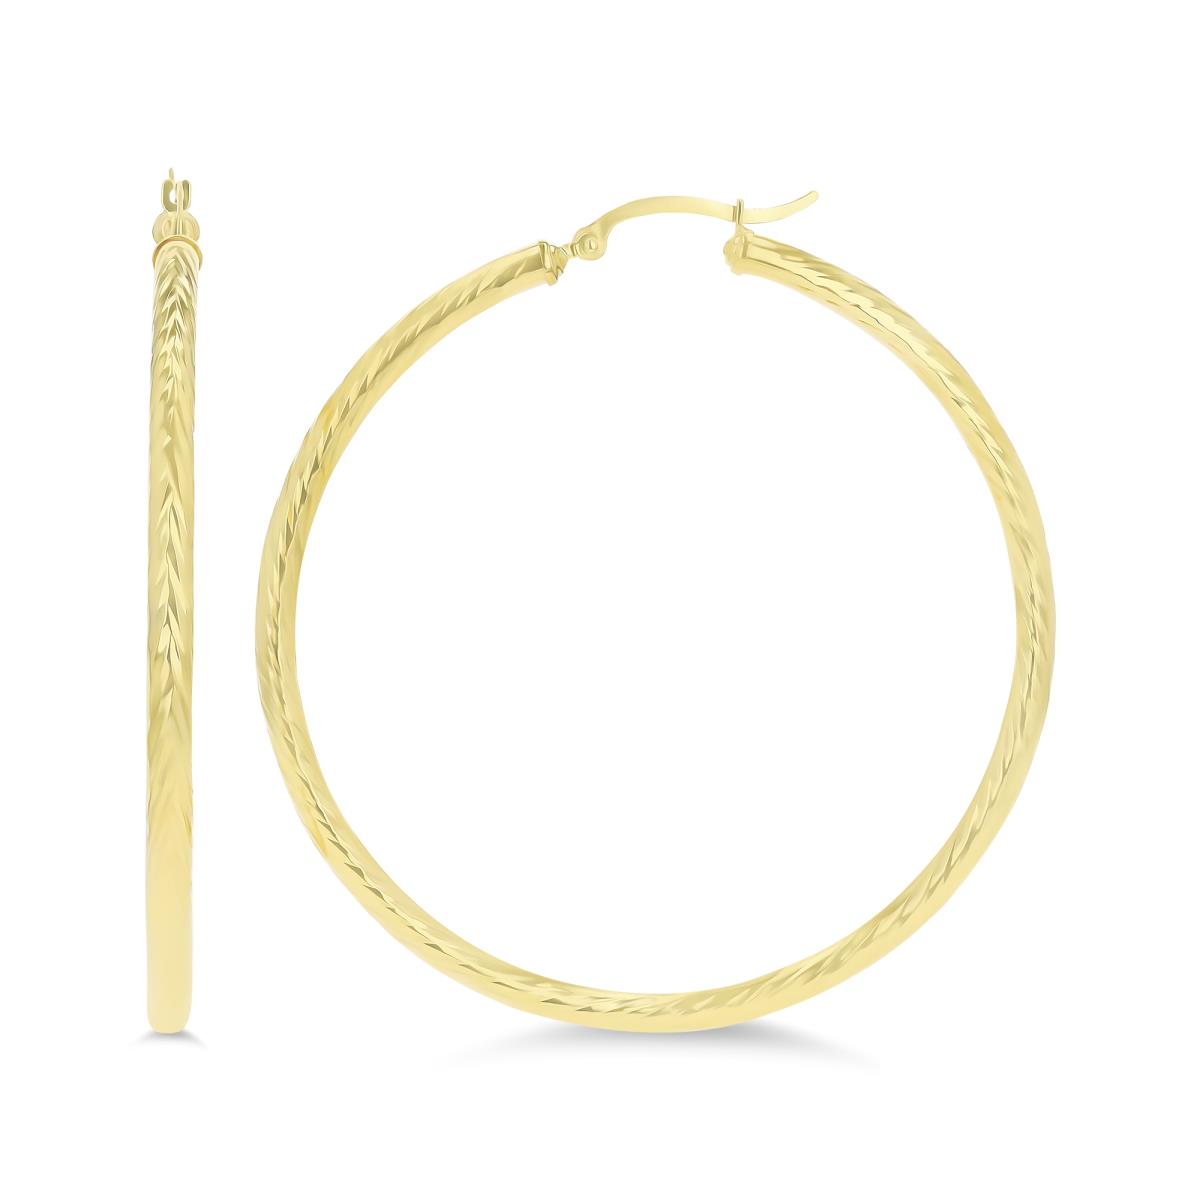 14K Yellow Gold 60x3mm (2.25") Twisted DC Hoop Earring